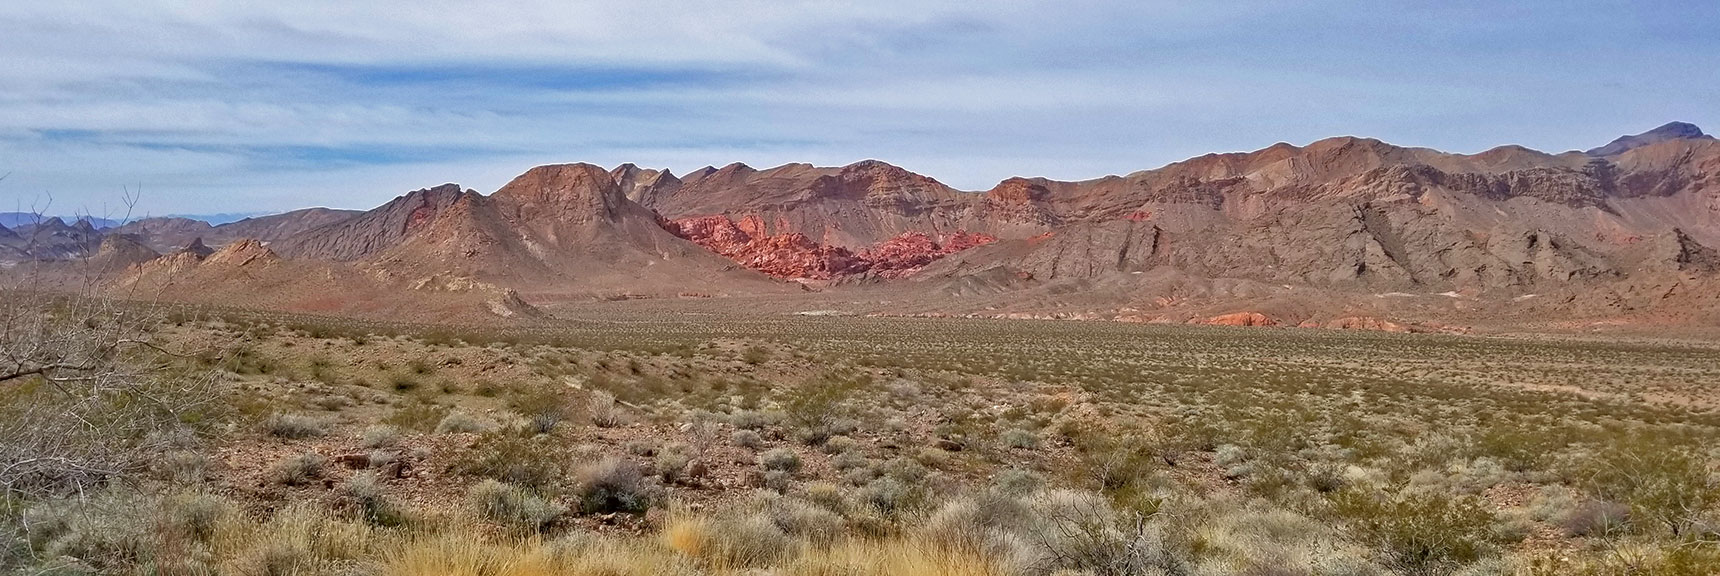 Bowl of Fire Viewed from About Mile 18 On Northshore Road in Lake Mead National Park, Nevada